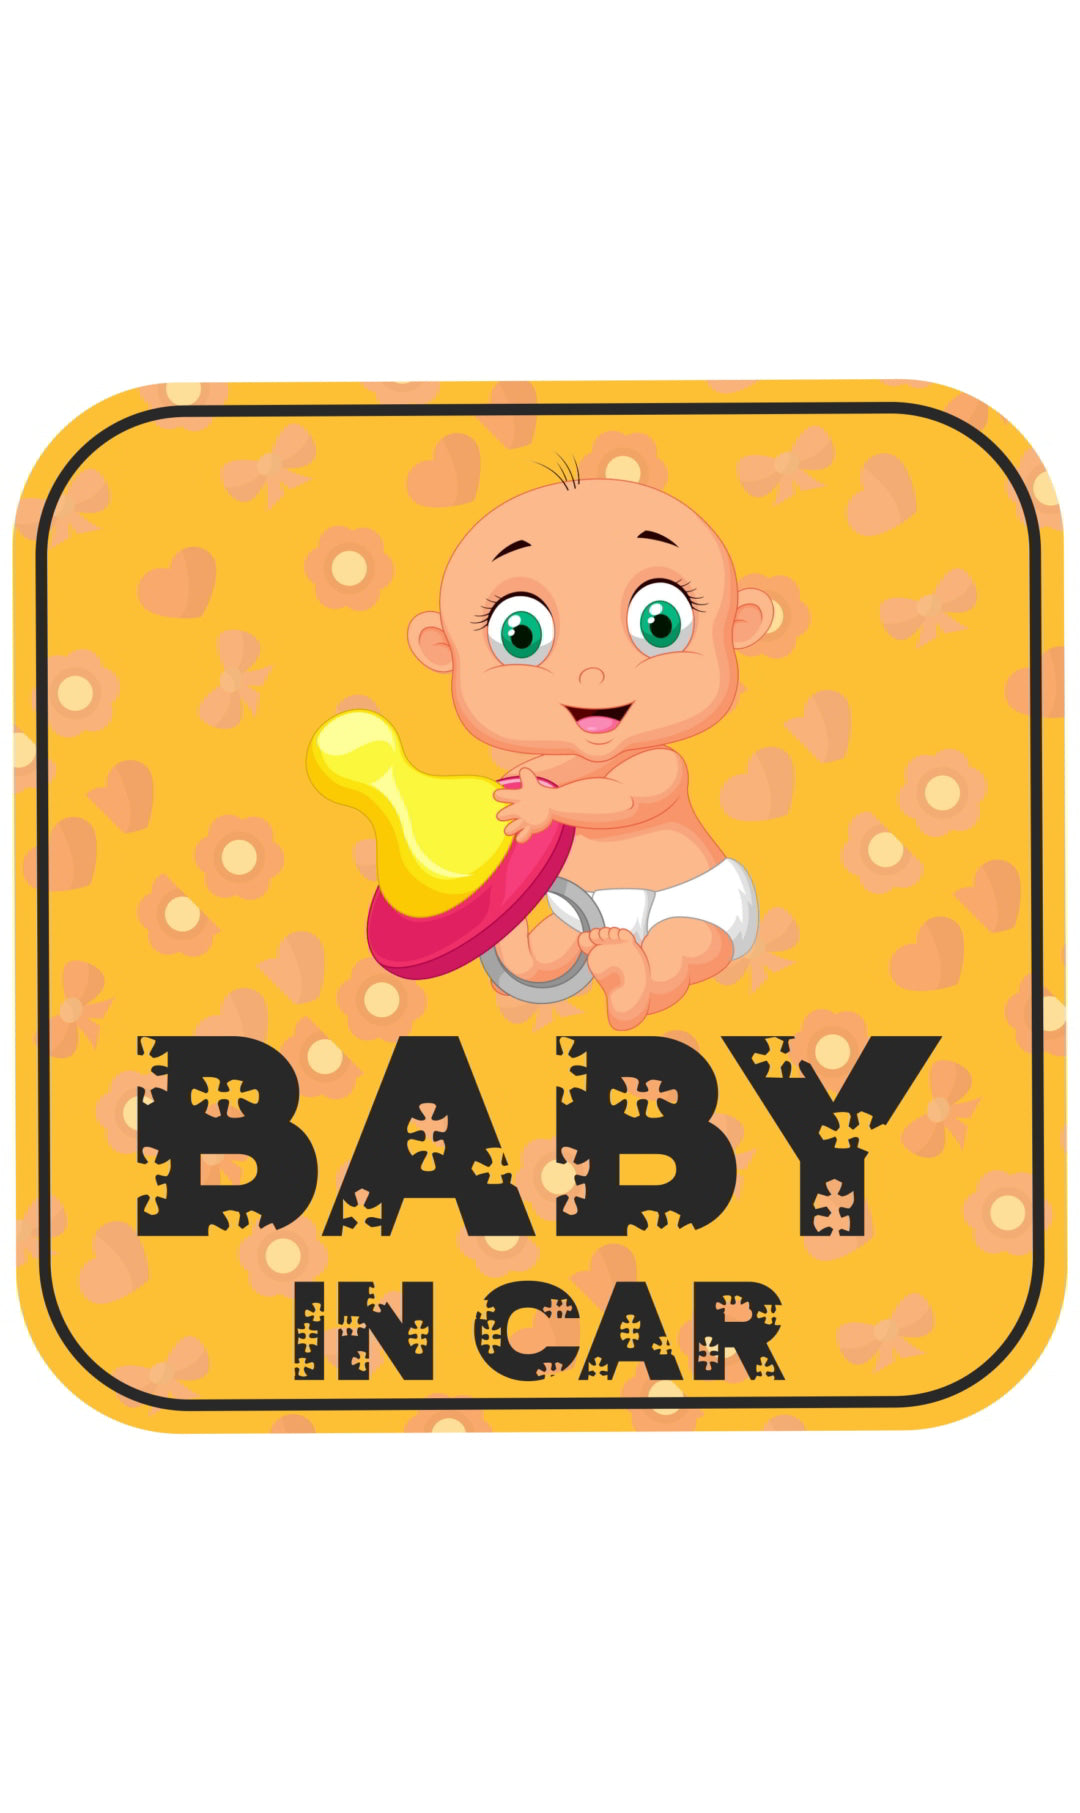 Baby in Car Decal Sticker(2pc)_c30